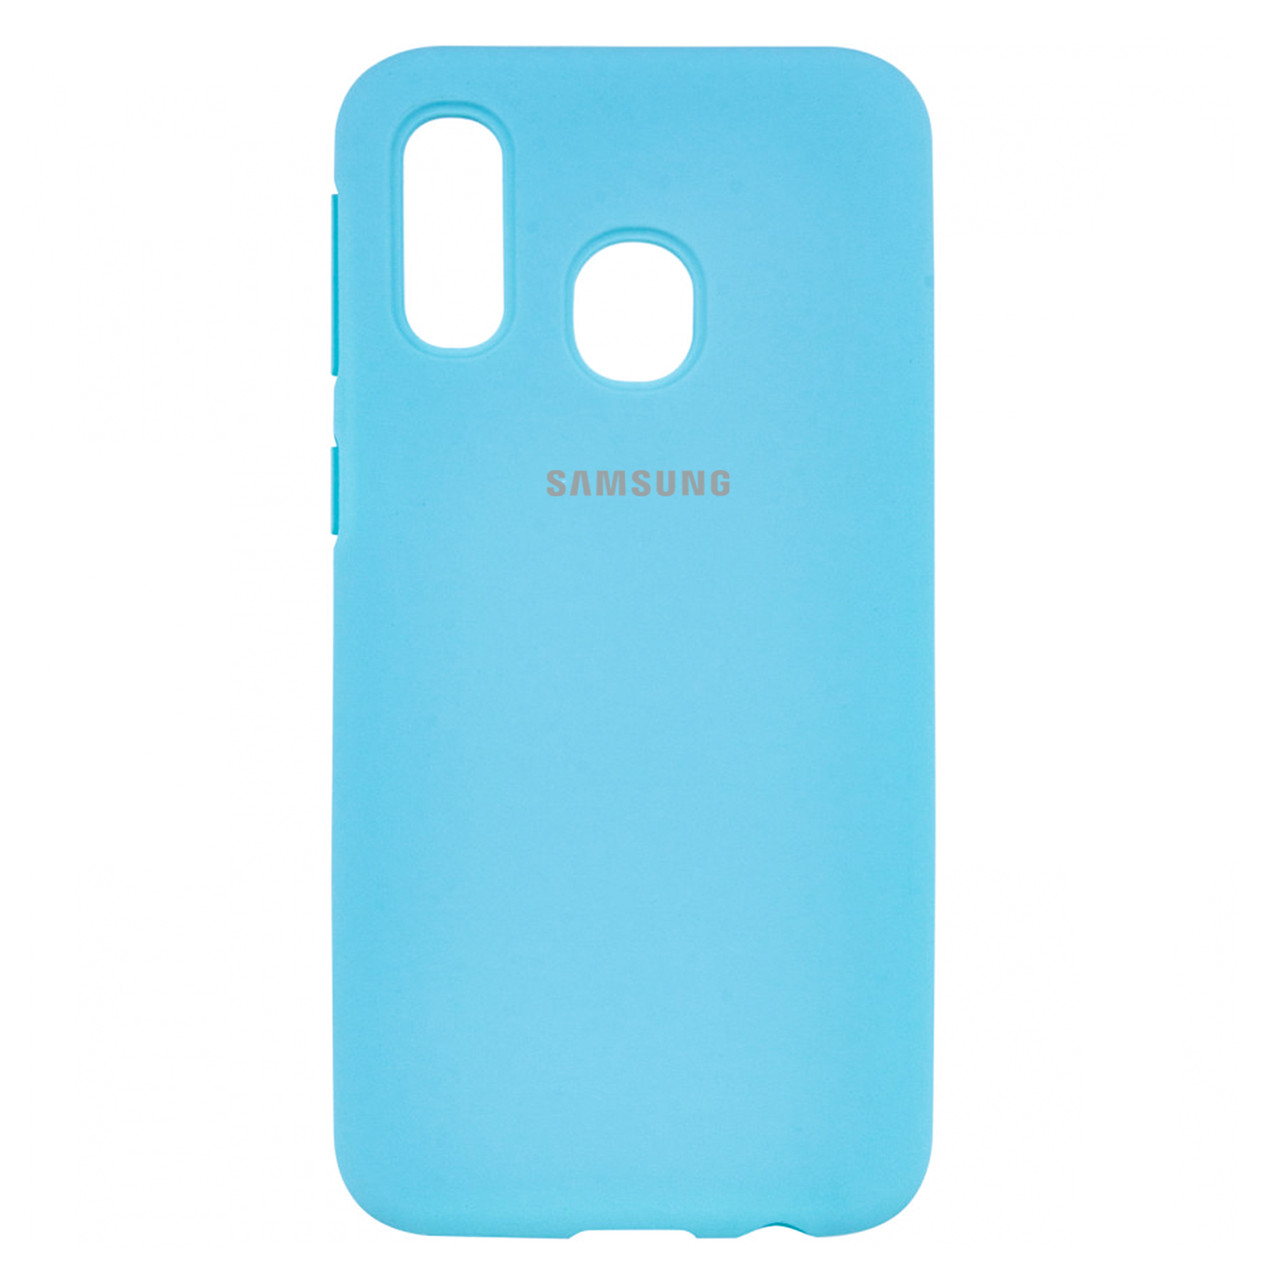 Чехол для Samsung Galaxy A20/A30 back cover Silky and soft-touch Silicone Cover V1, Blue - фото 1 - id-p115049514